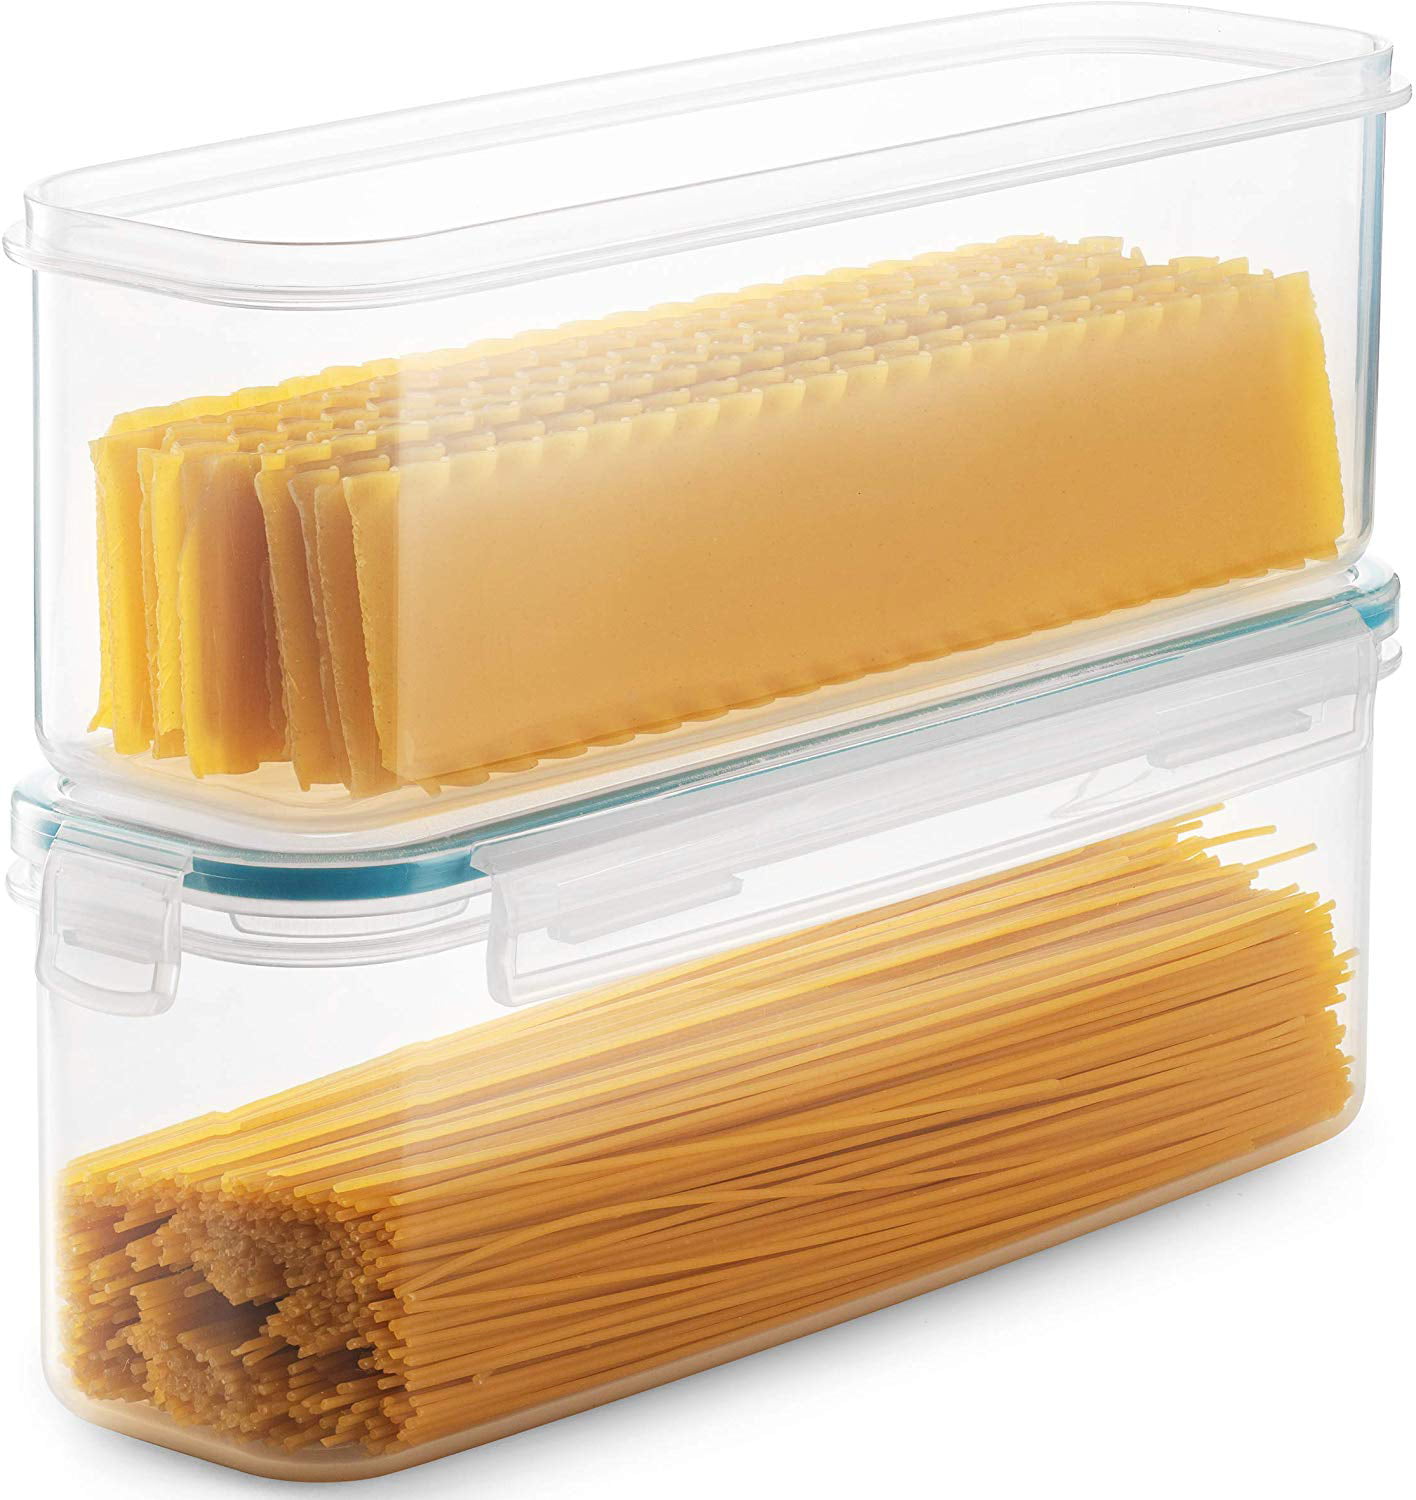 Utopia Kitchen Pasta Containers Storage - 2 Pack Airtight Food Storage Containers & Pasta Dispenser for Pantry Organization and Storage - Canister